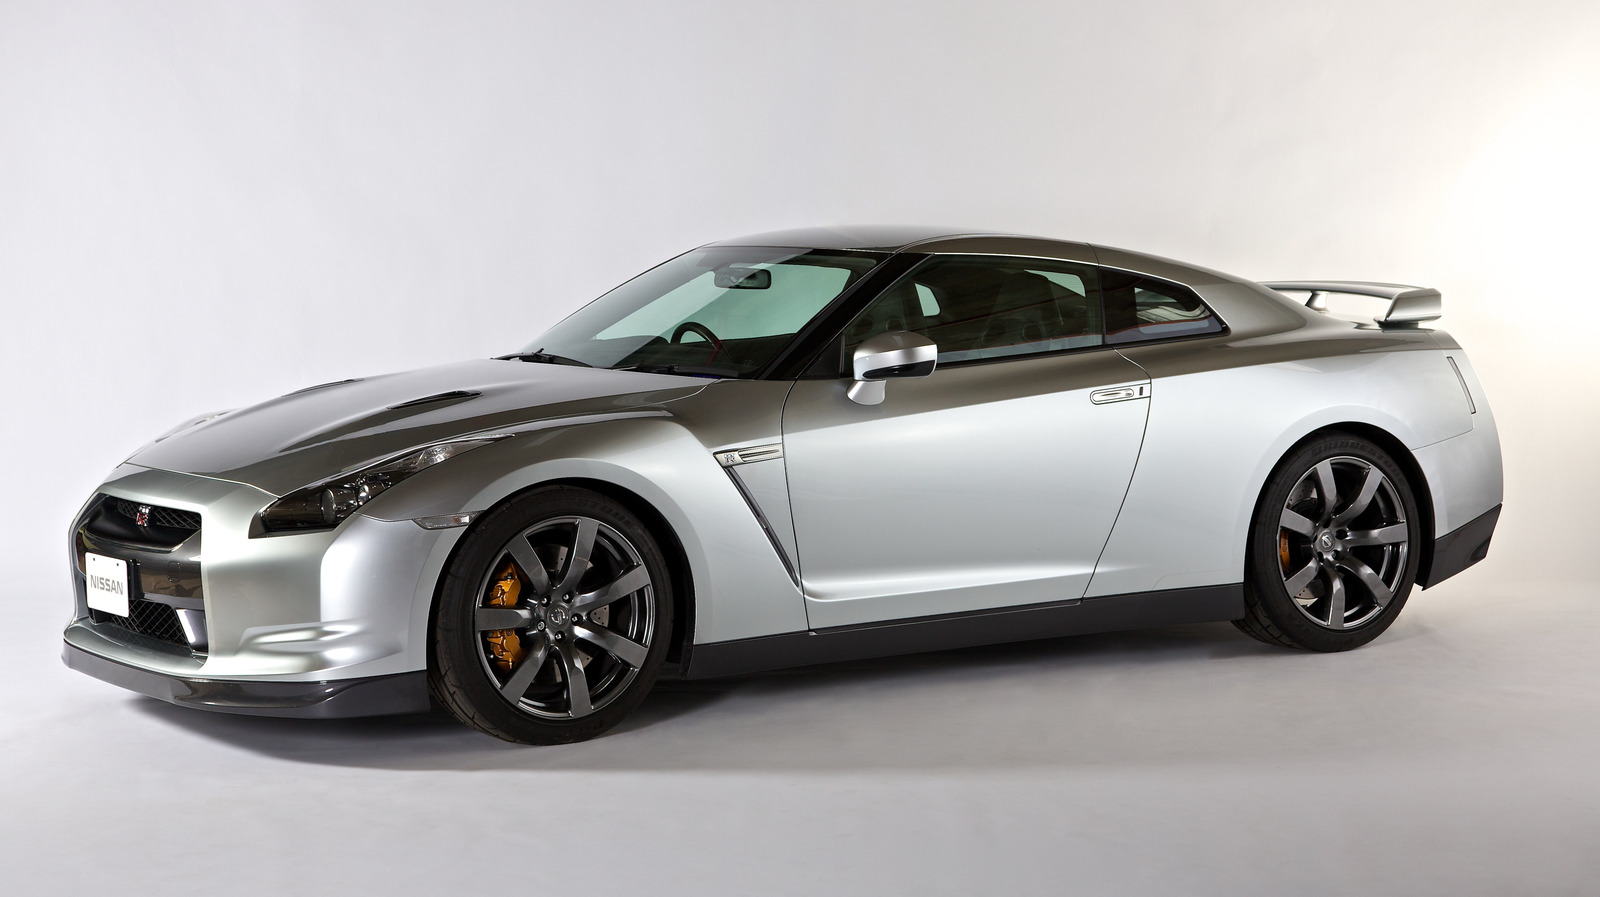 Here’s What Made The Nissan R35 So Special (And Why You Should Buy One)